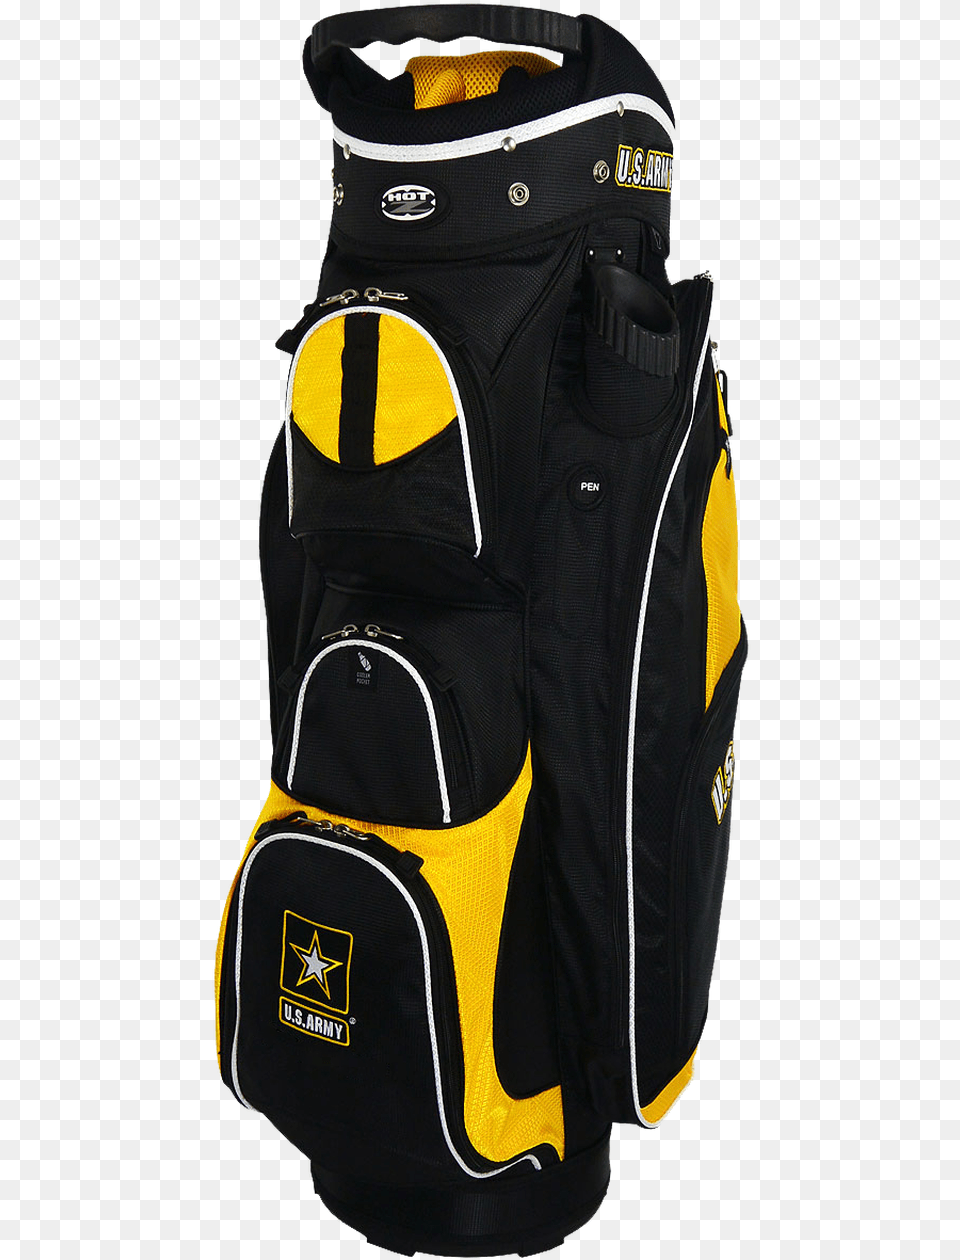 Army Military Cart Bag By Hotz Golf Golf Bag, Clothing, Coat, Jacket, Backpack Png